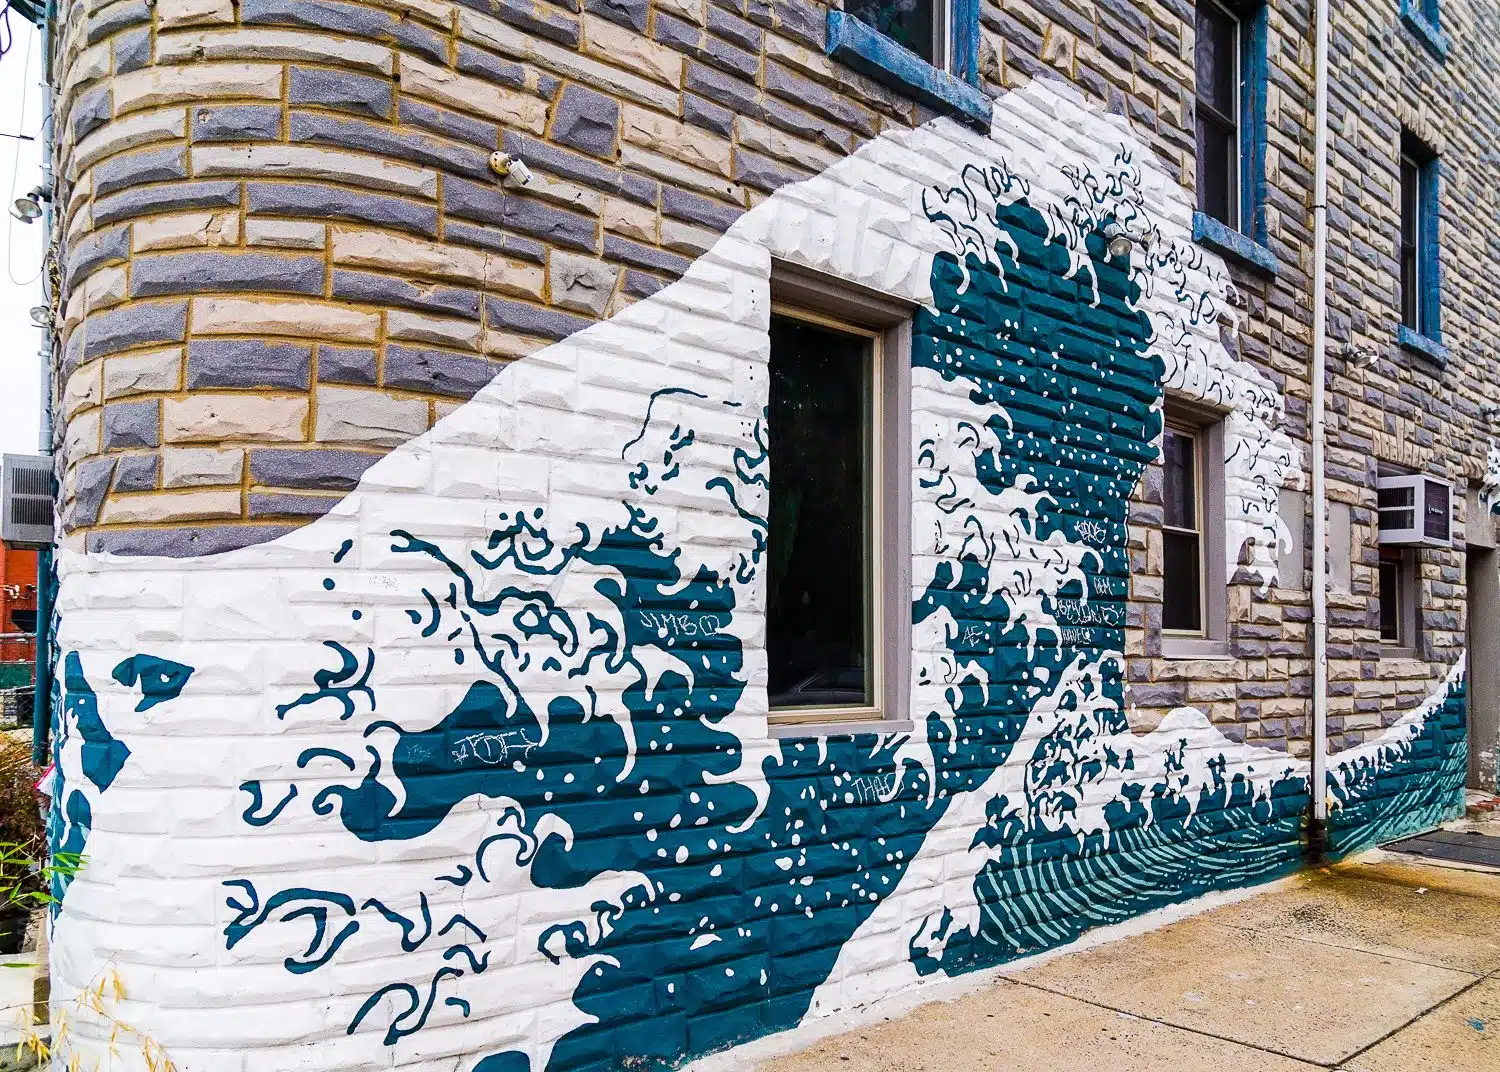 This building's wave wall echoes the watery theme.